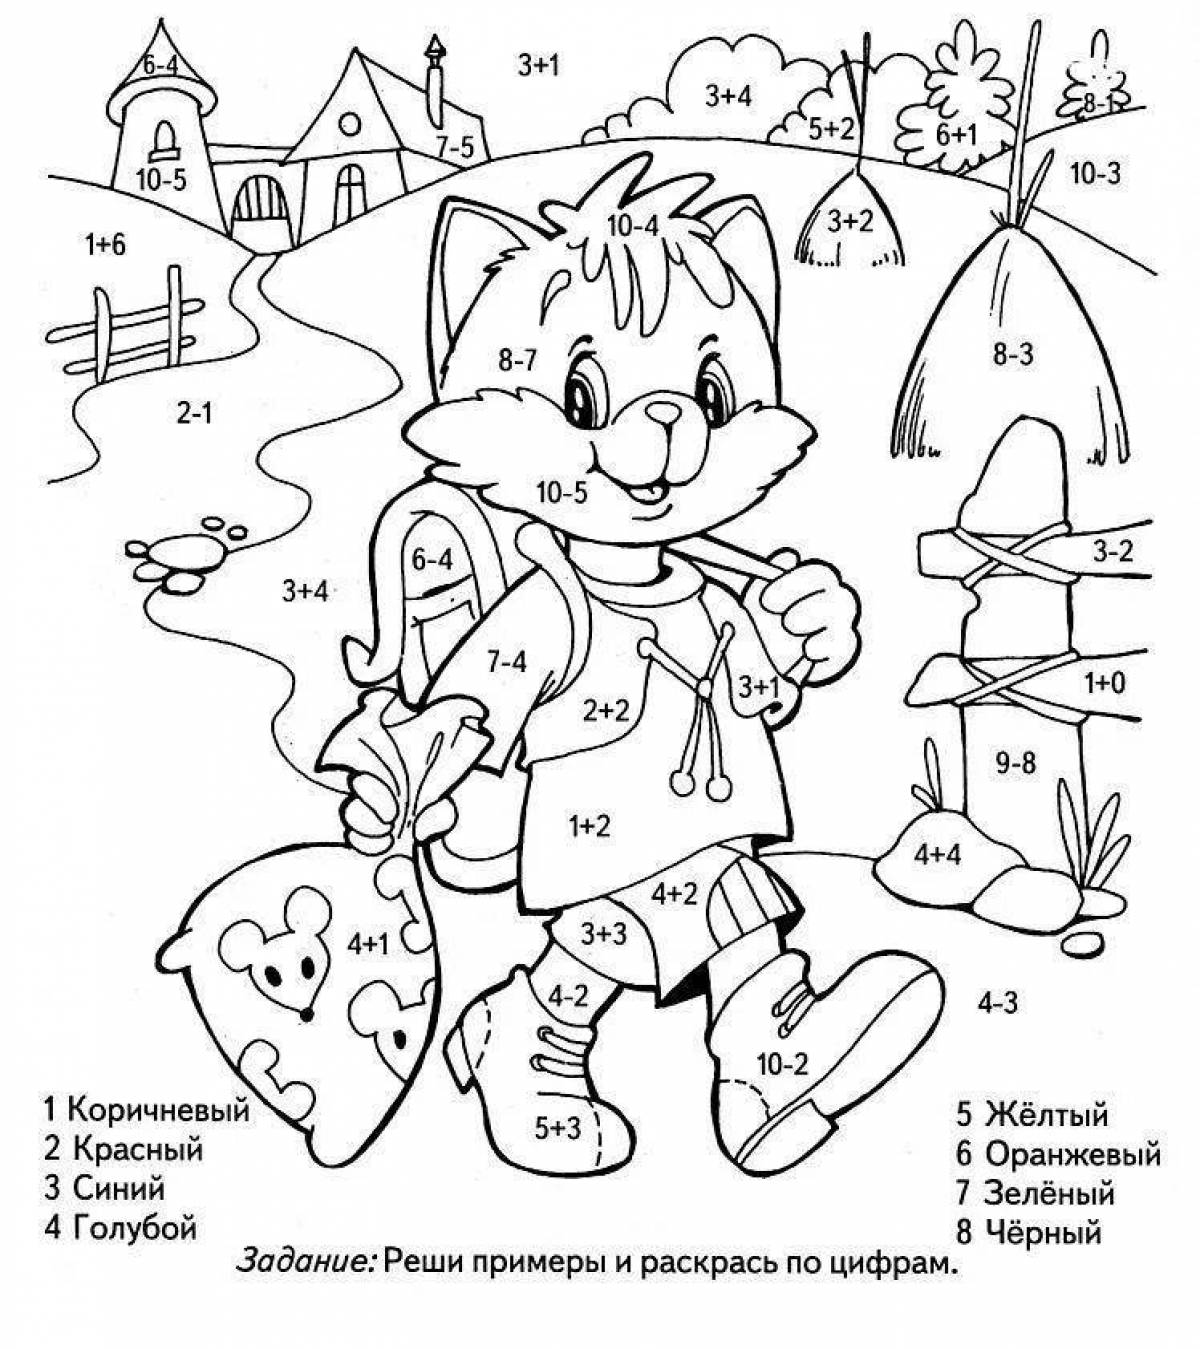 Examples of colorful coloring pages